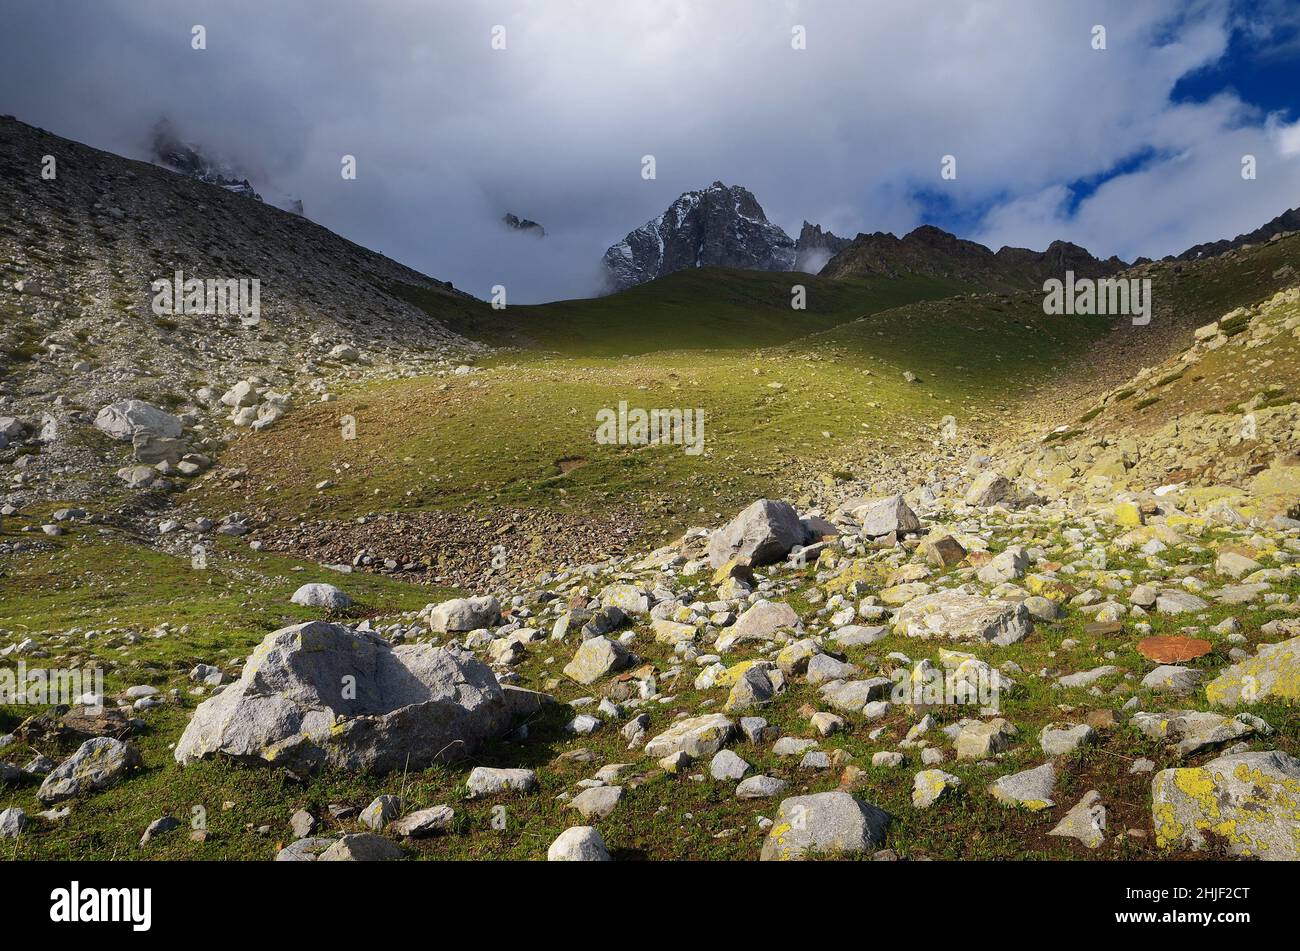 Landscape in the mountains with rocks and cliffs. Svaneti, Georgia, Caucasus Stock Photo